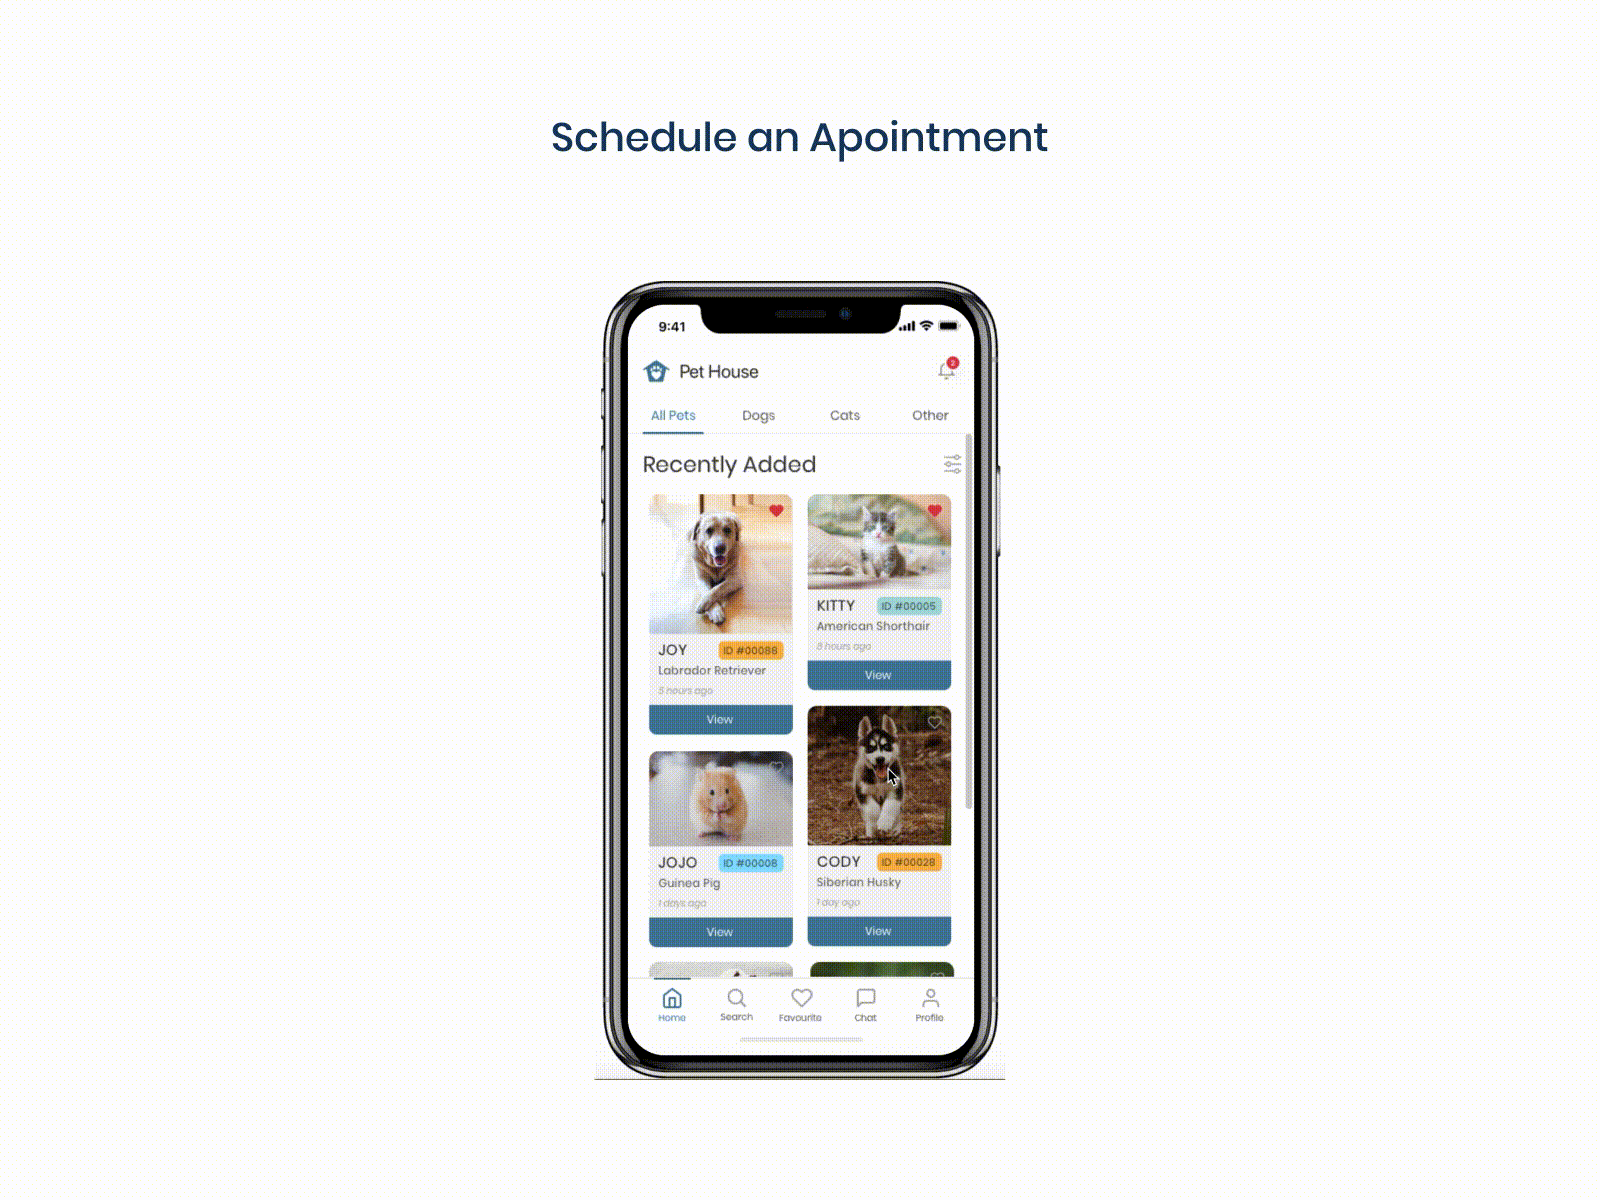 Schedule an Apointment - Pet House - Mobile App UI 2019 apointment design mobile app mobileappdesign schedule app ui ux uidesign uiinspirations uiux user experience user interface user interface design userinterface ux ux design uxdesign uxinspiration